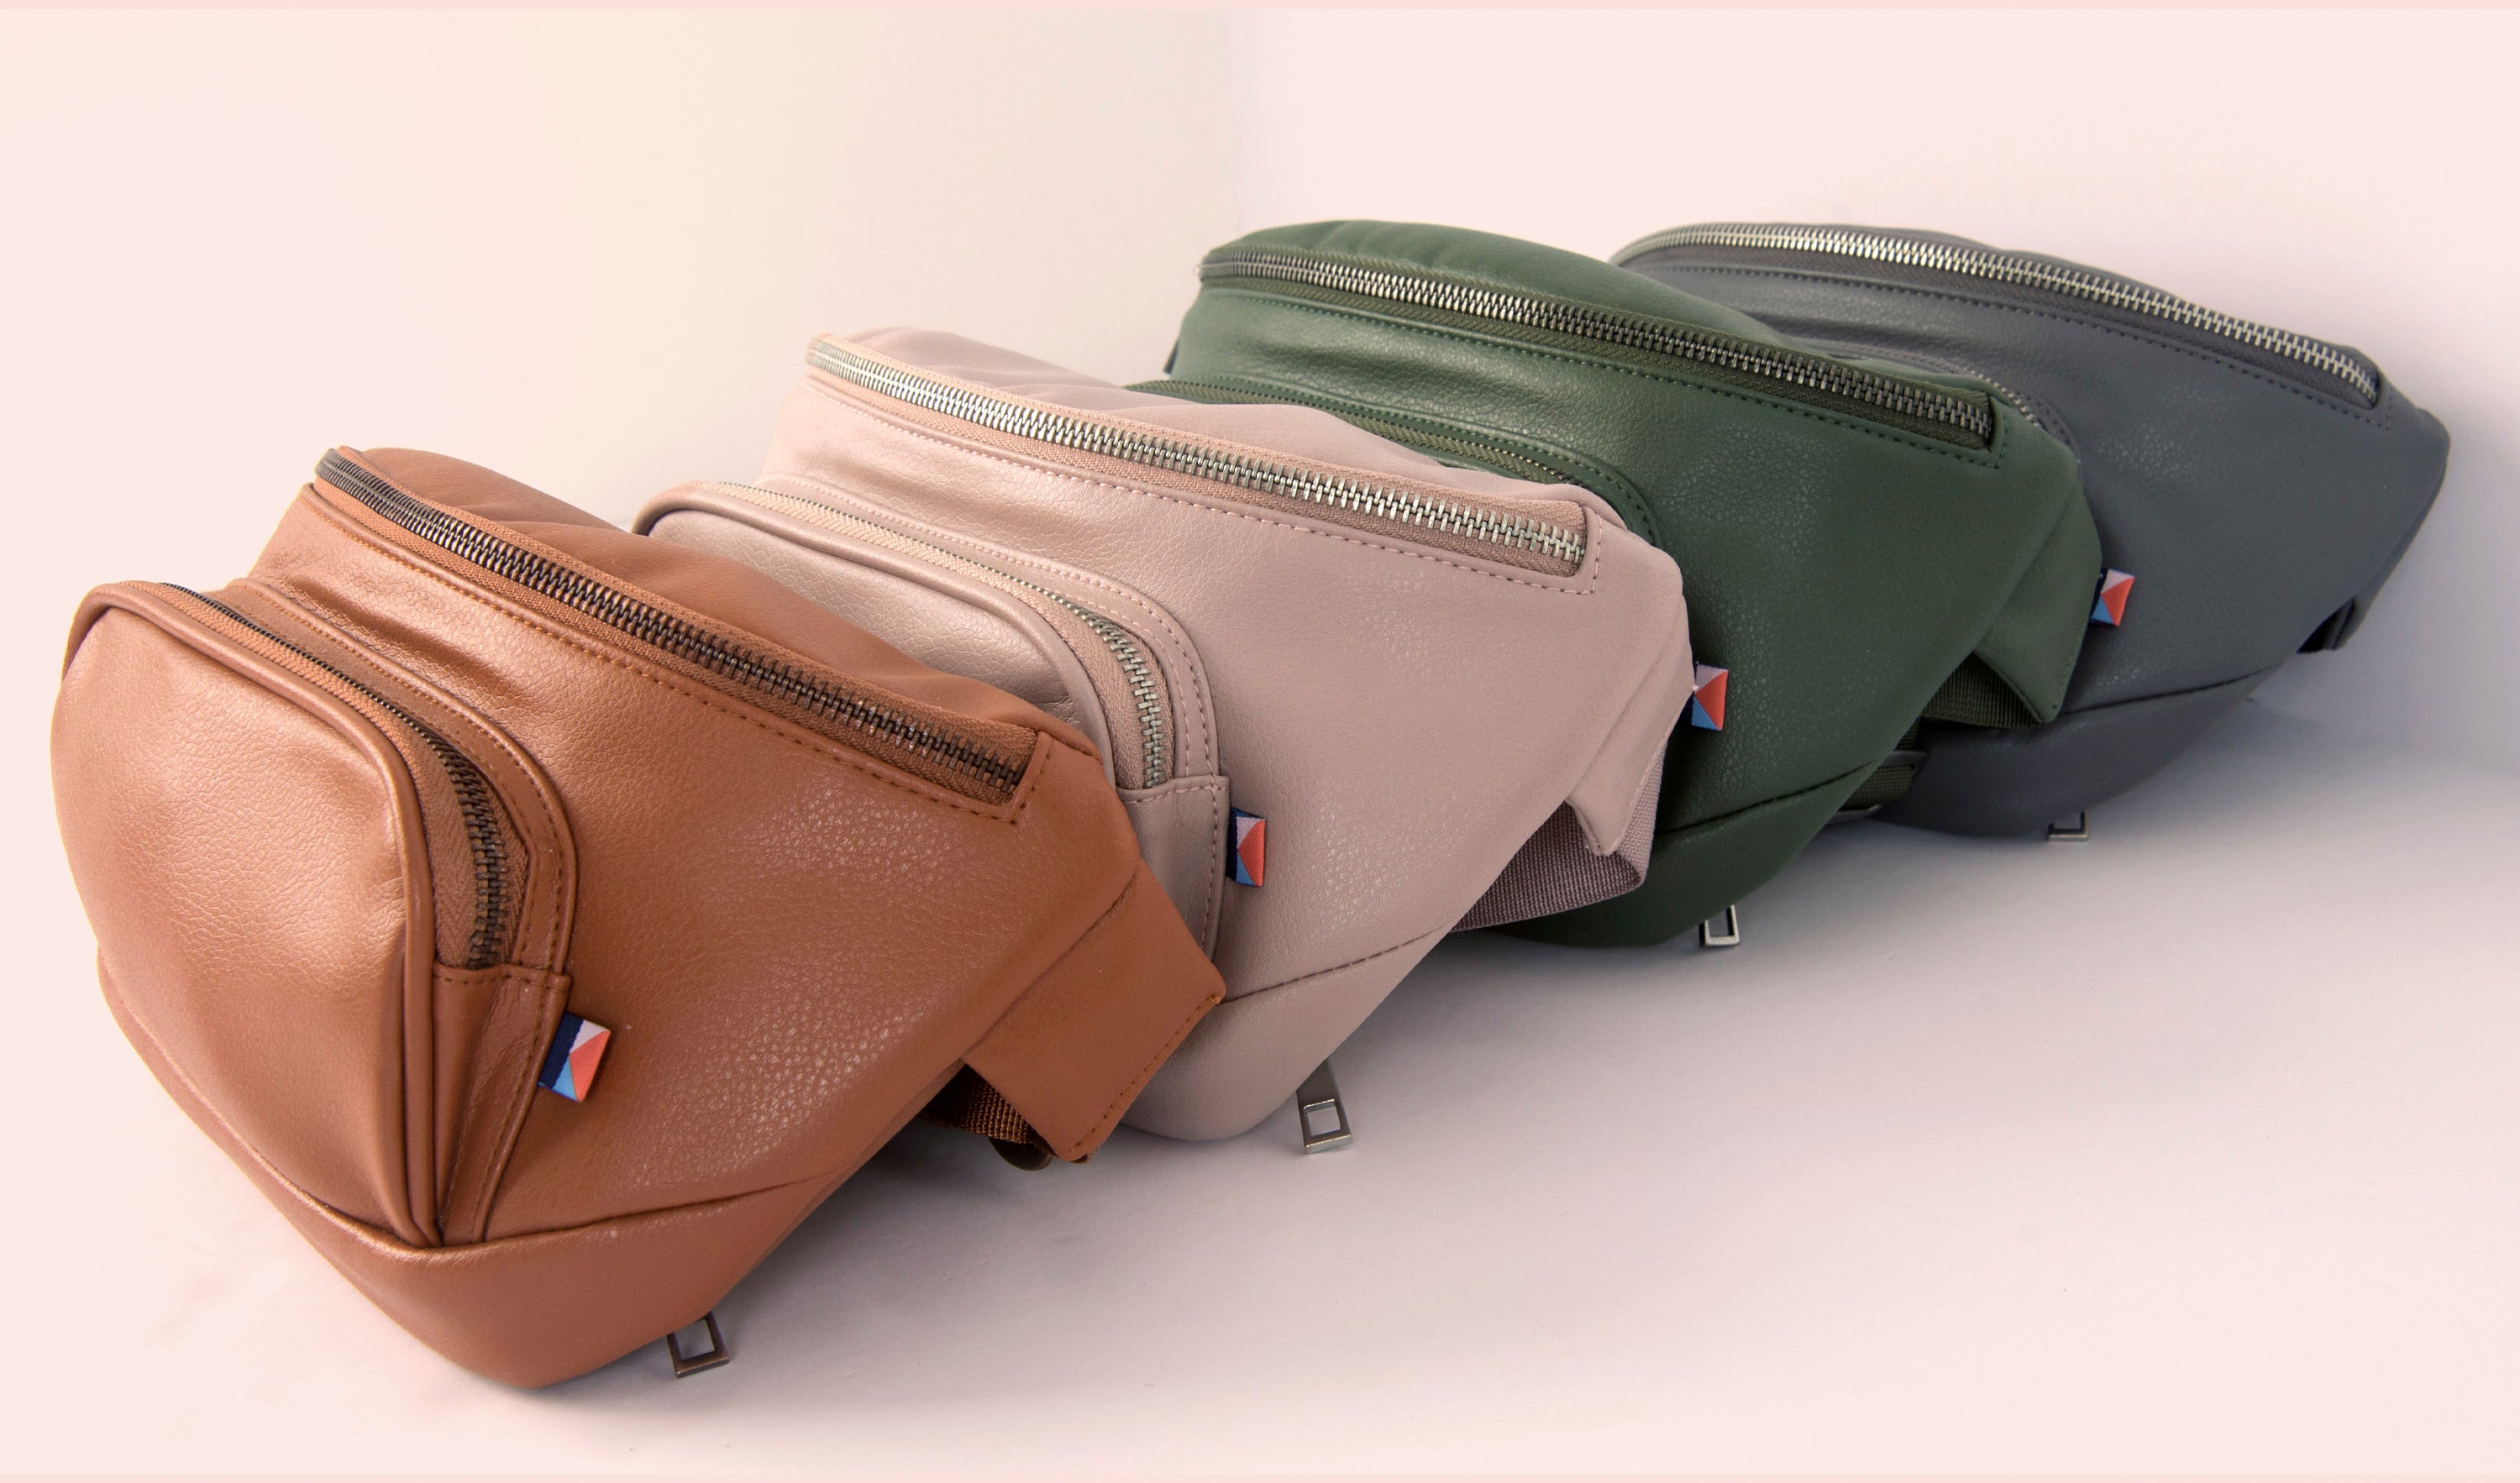 Kibou travel purses in vegan leather tan, blush, olive, and charcoal